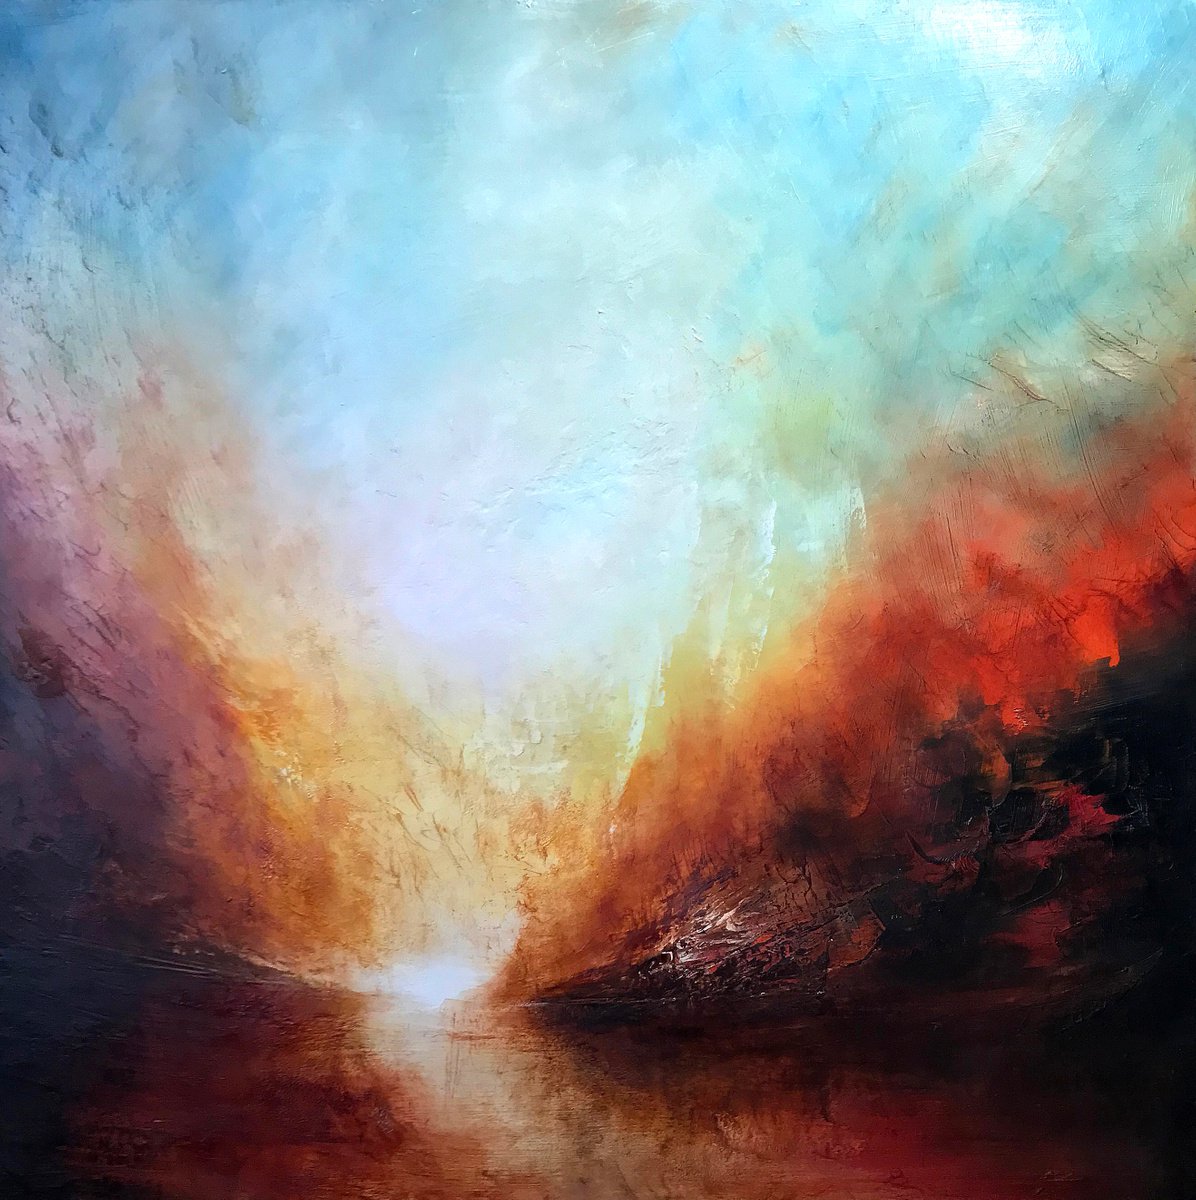 Empyrean Release by Paul Kingsley Squire